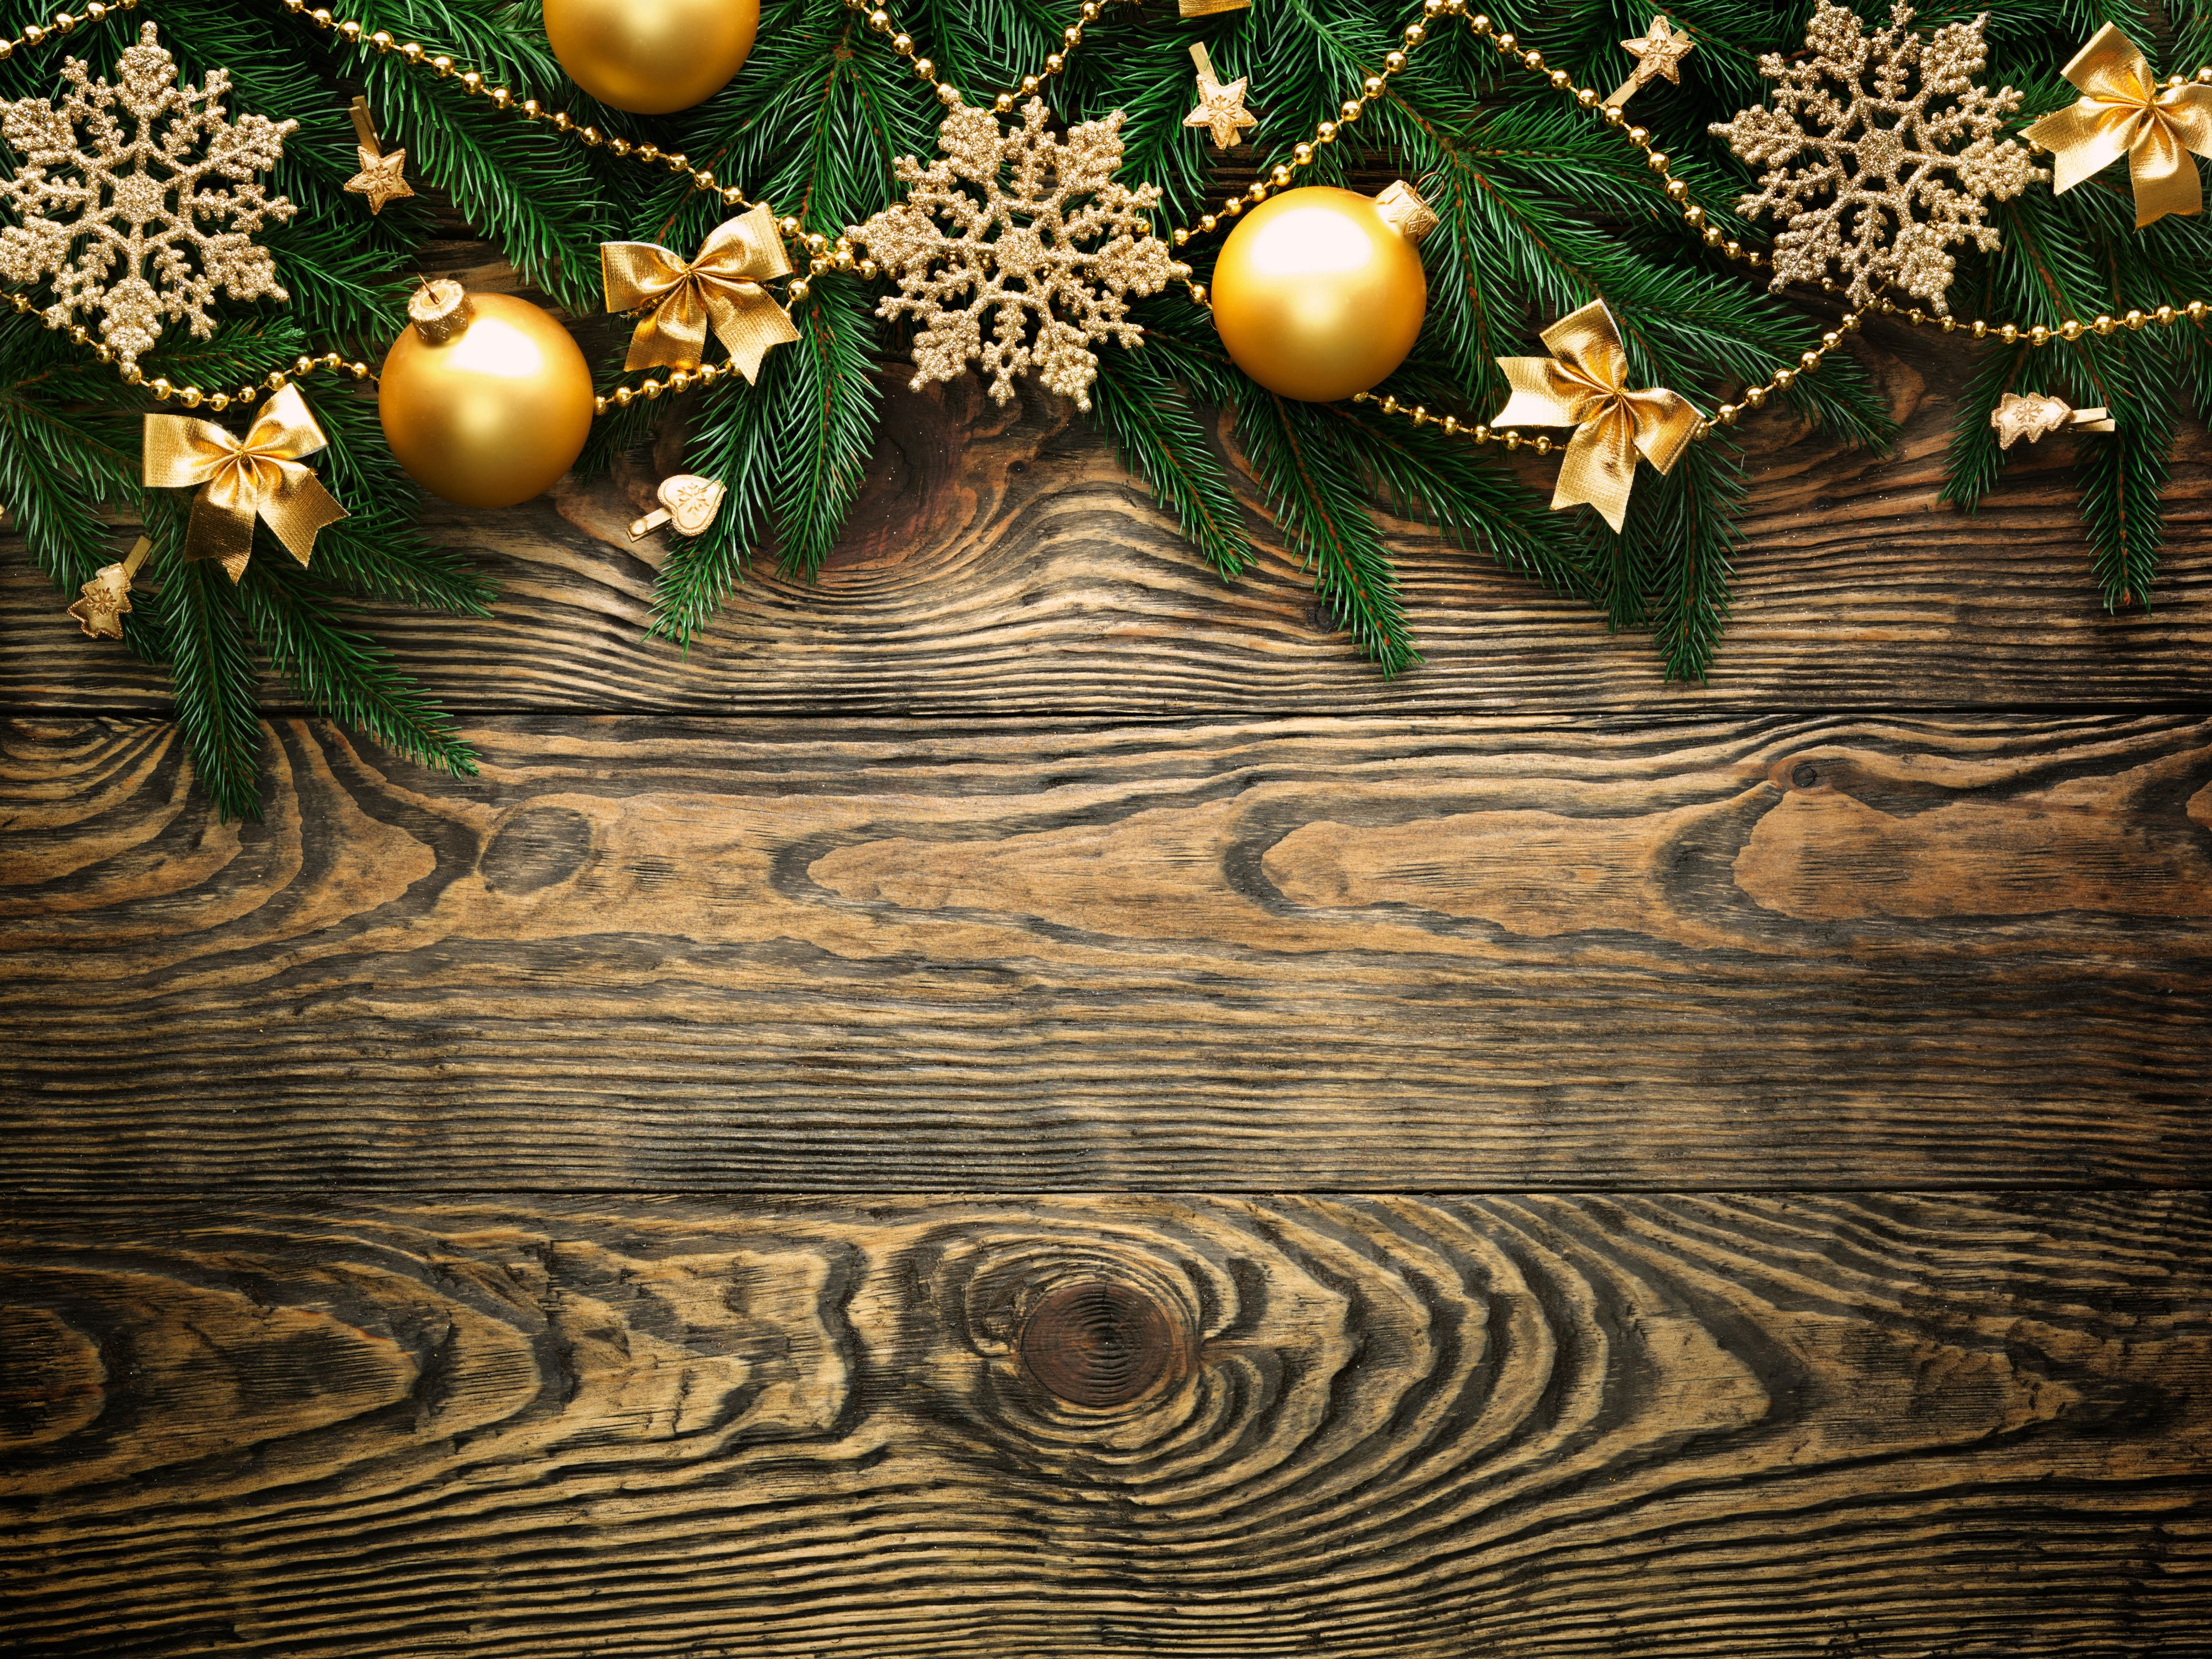 Wooden Christmas Background With Gold Ornaments Quality Image And Transparent PNG Free Clipart